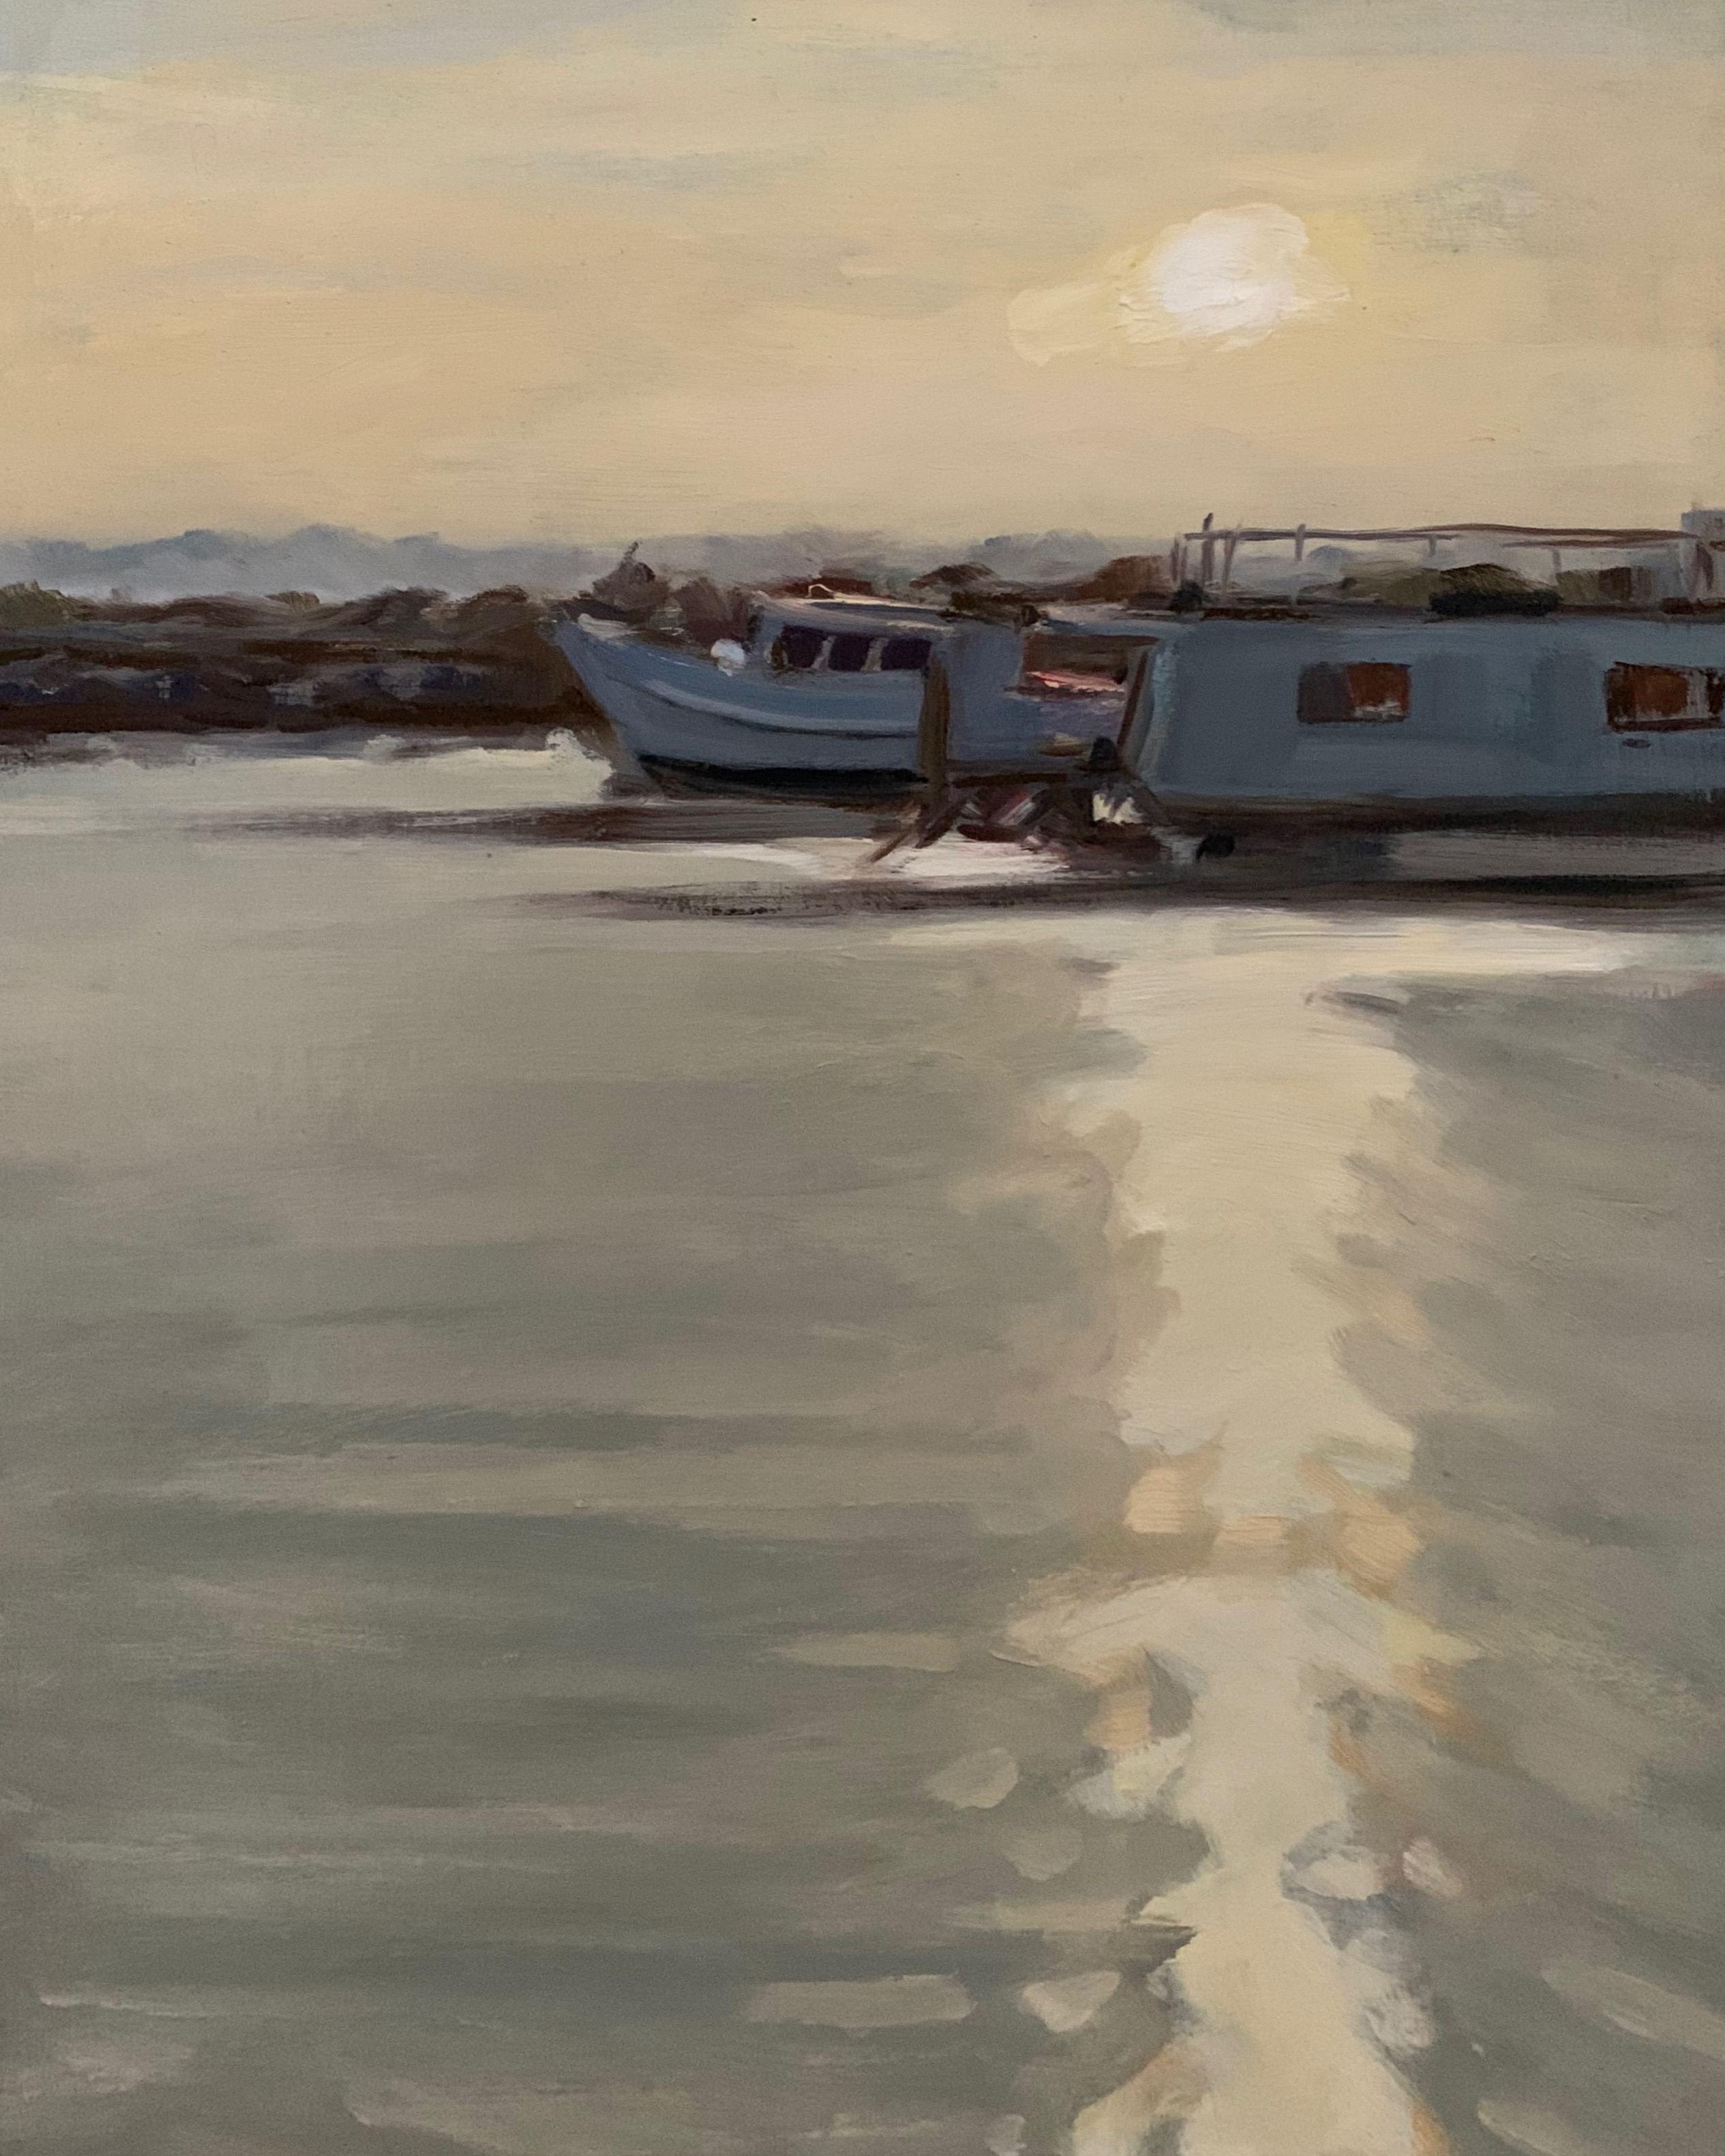 Houseboat in the Late Afternoon  by Rosy Lloyd | Lethbridge Landscape Prize 2021 Finalists | Lethbridge Gallery